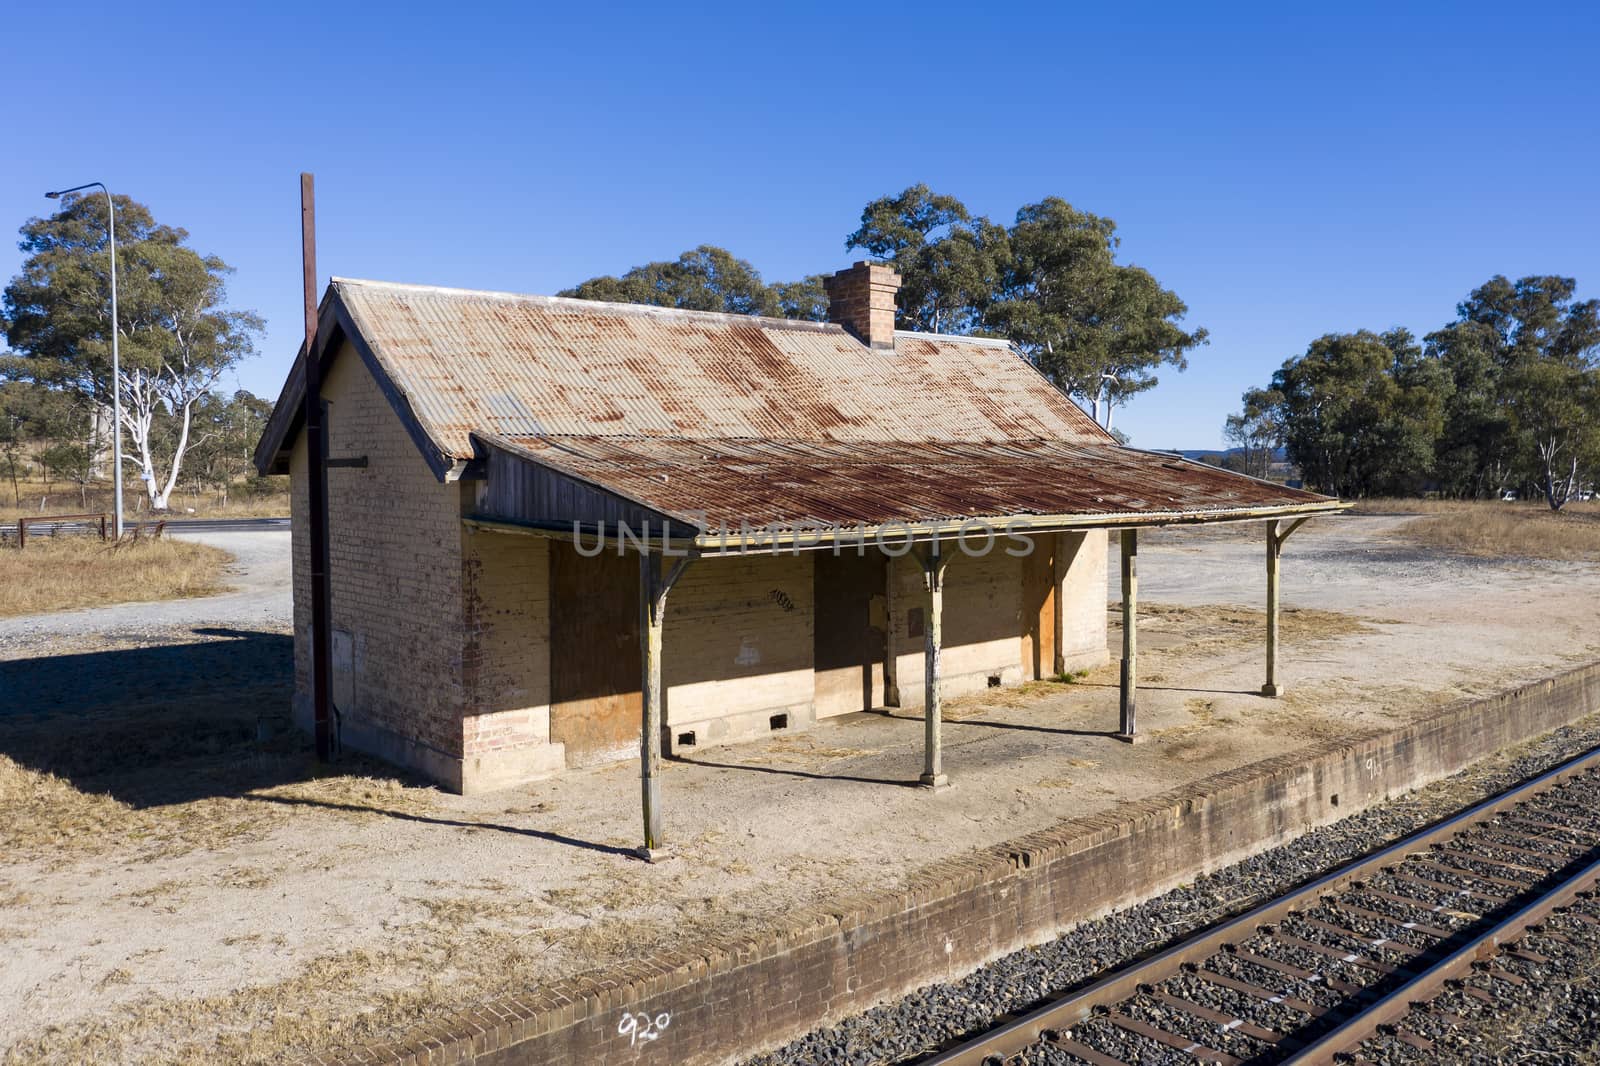 Old train station near a railway track in rural New South Wales, Australia.